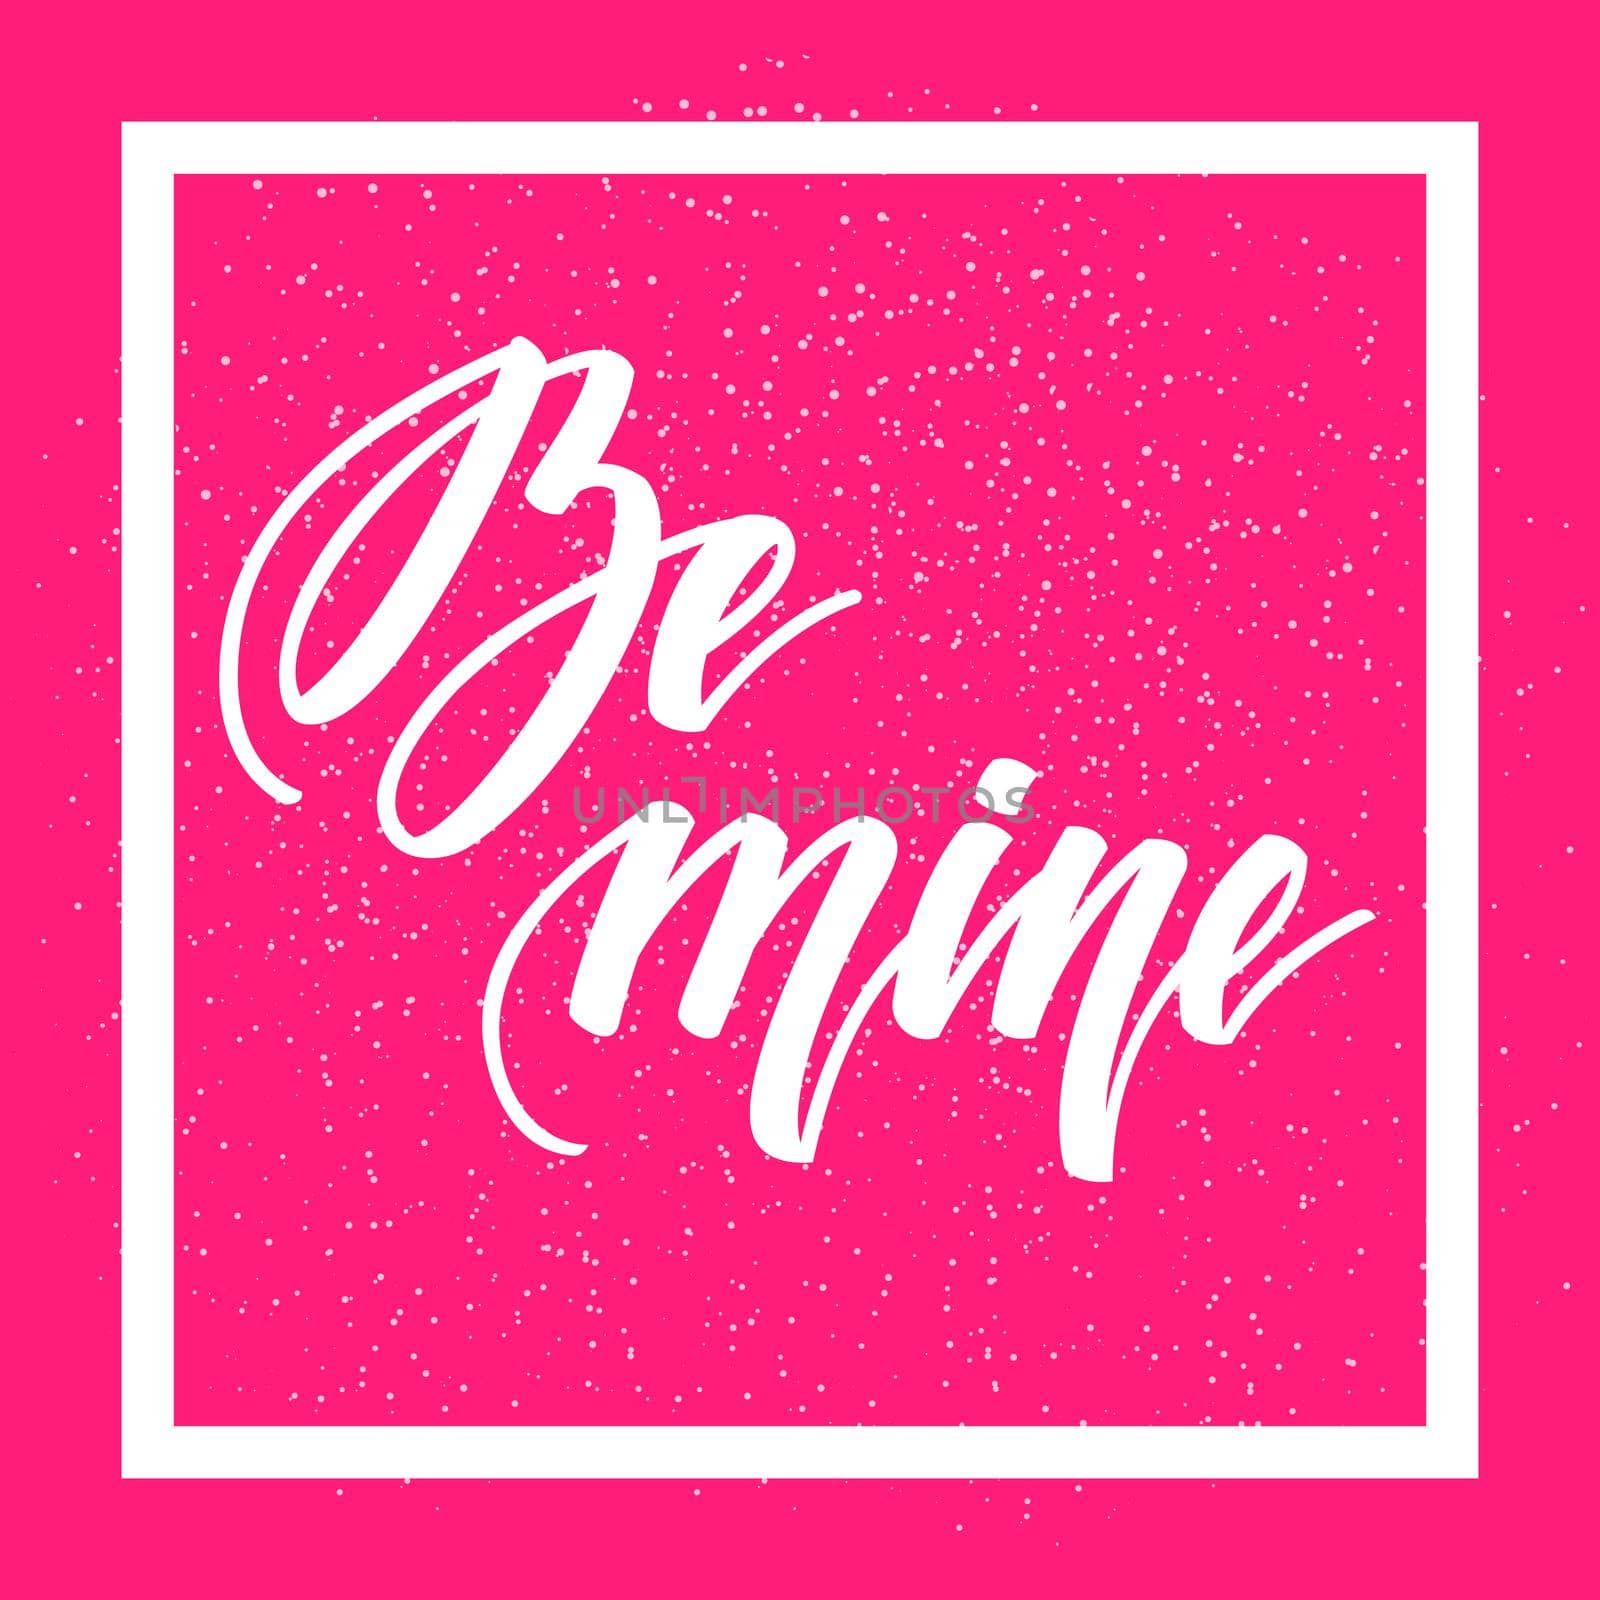 Be mine. Romantic lettering on pink background. illustration for Valentines day greeting cards, posters and much more.